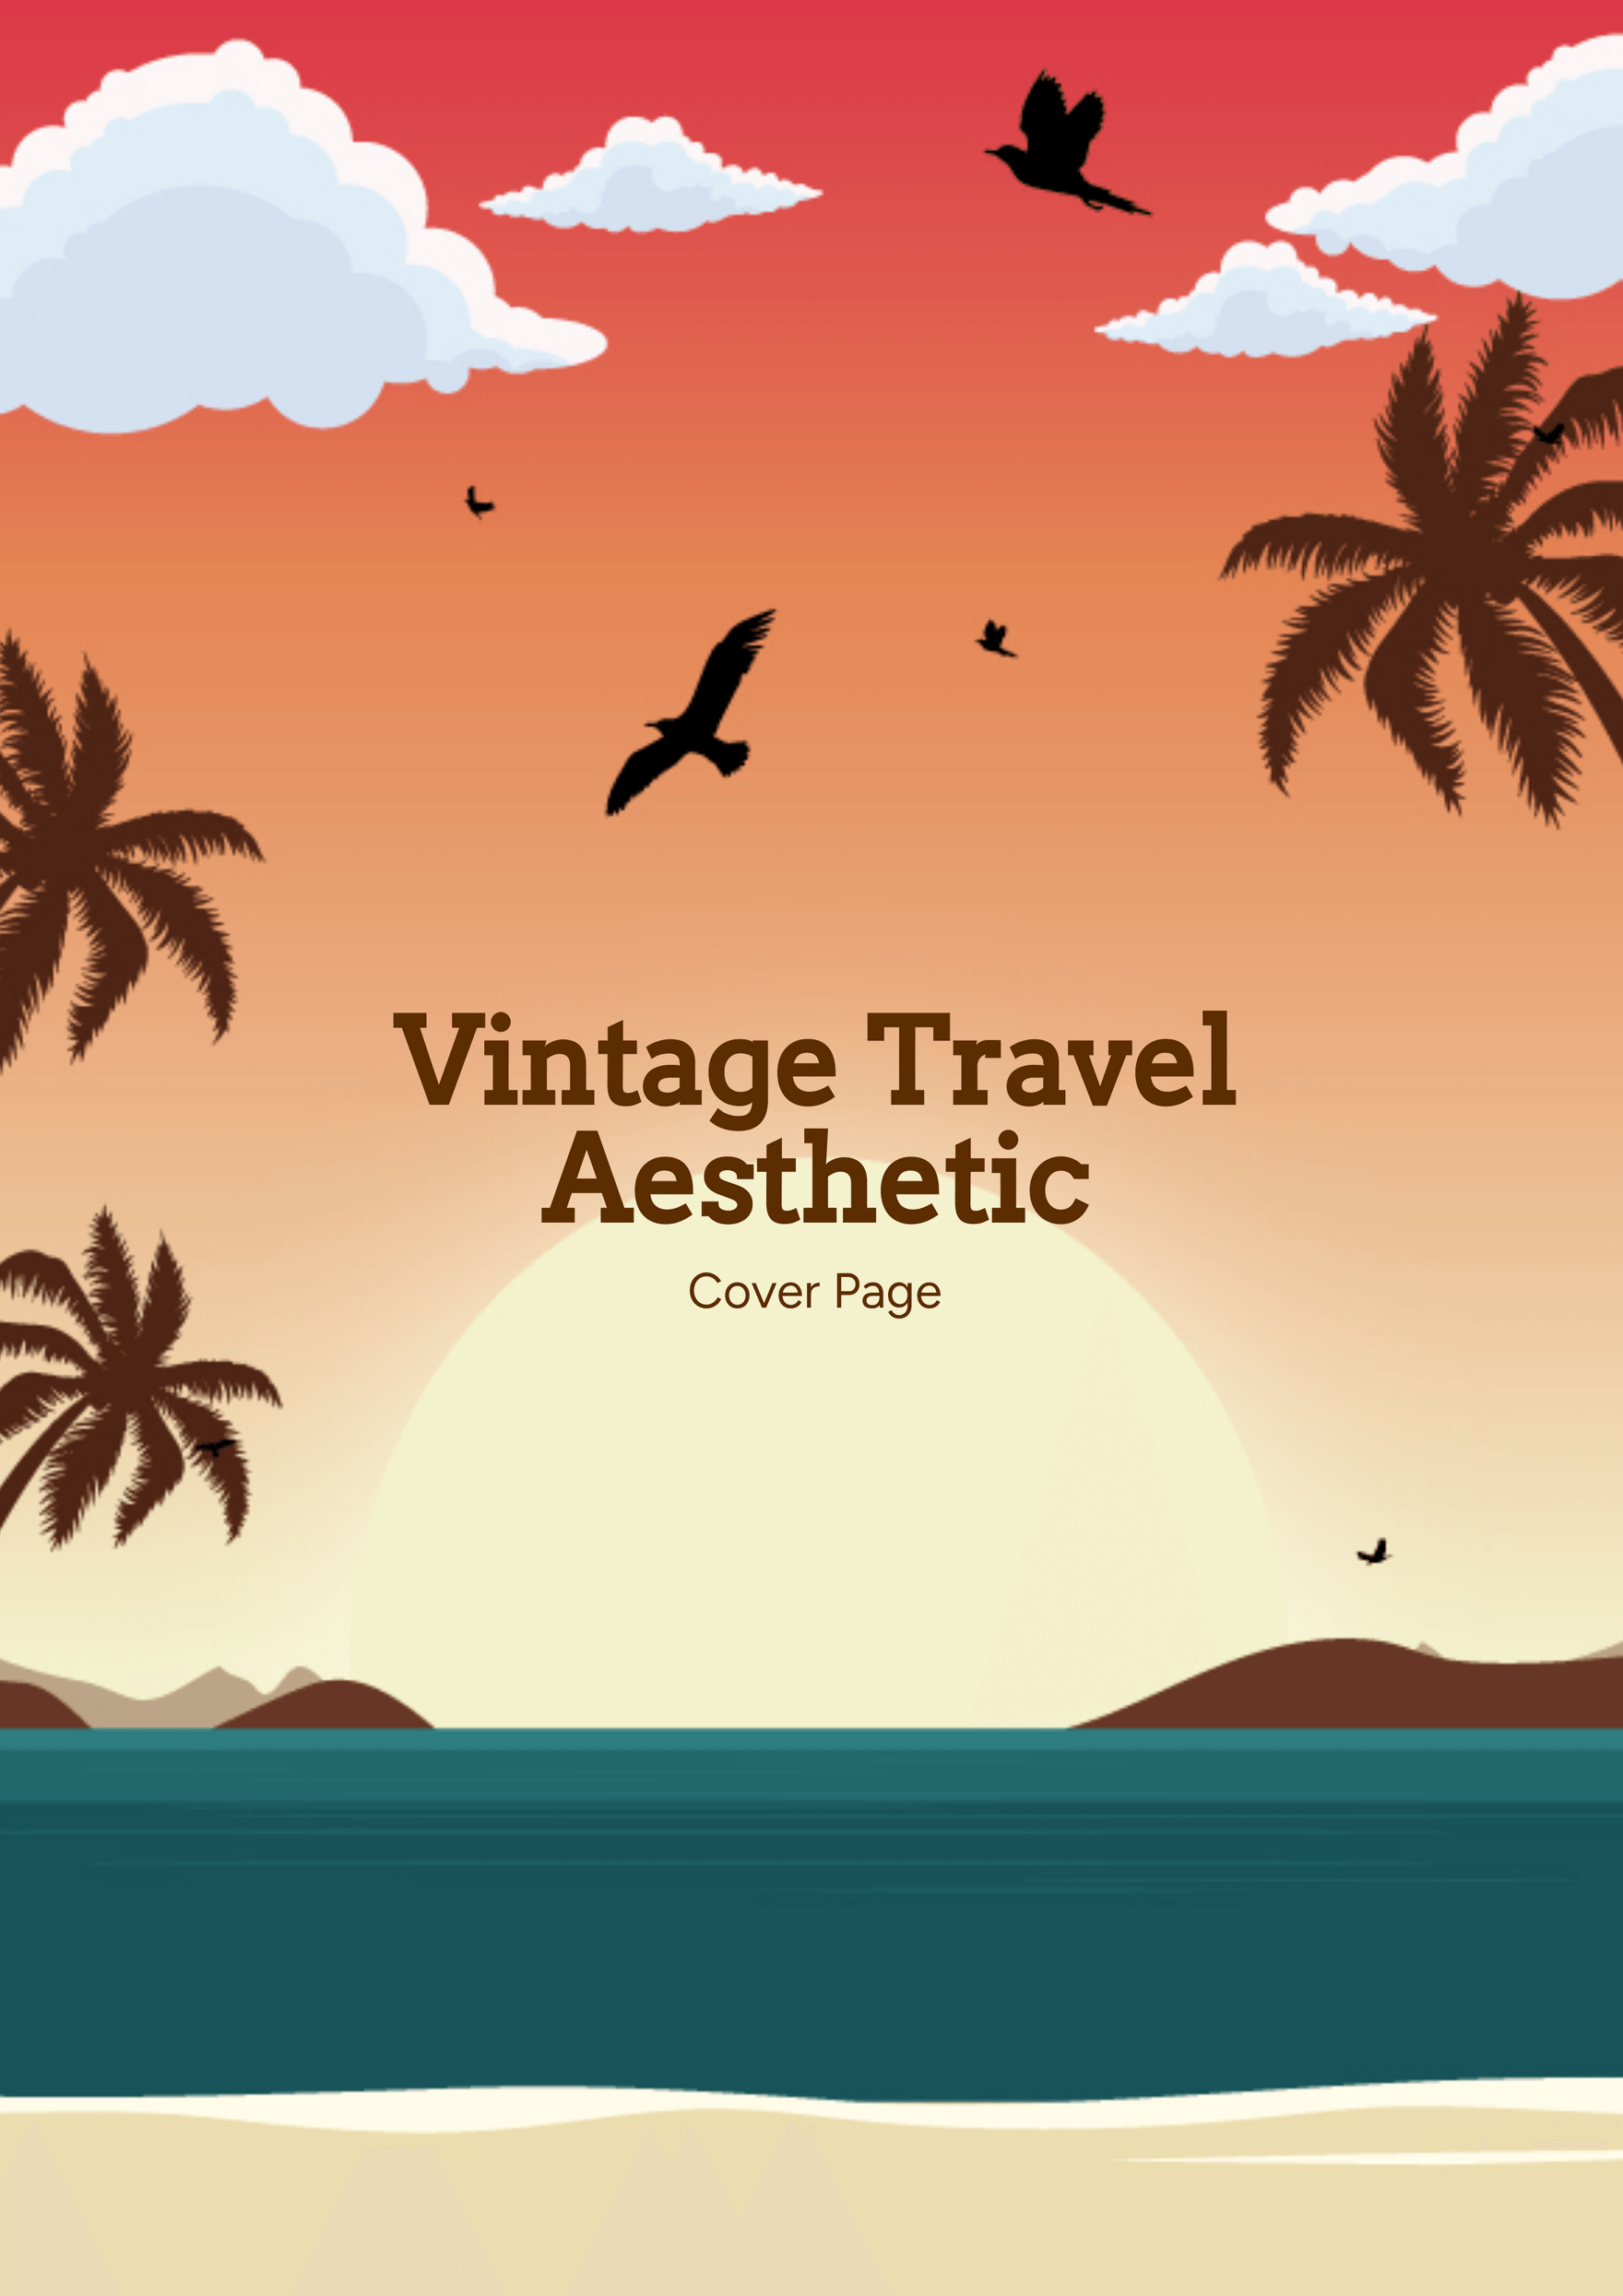 Vintage Travel Aesthetic Cover Page Template